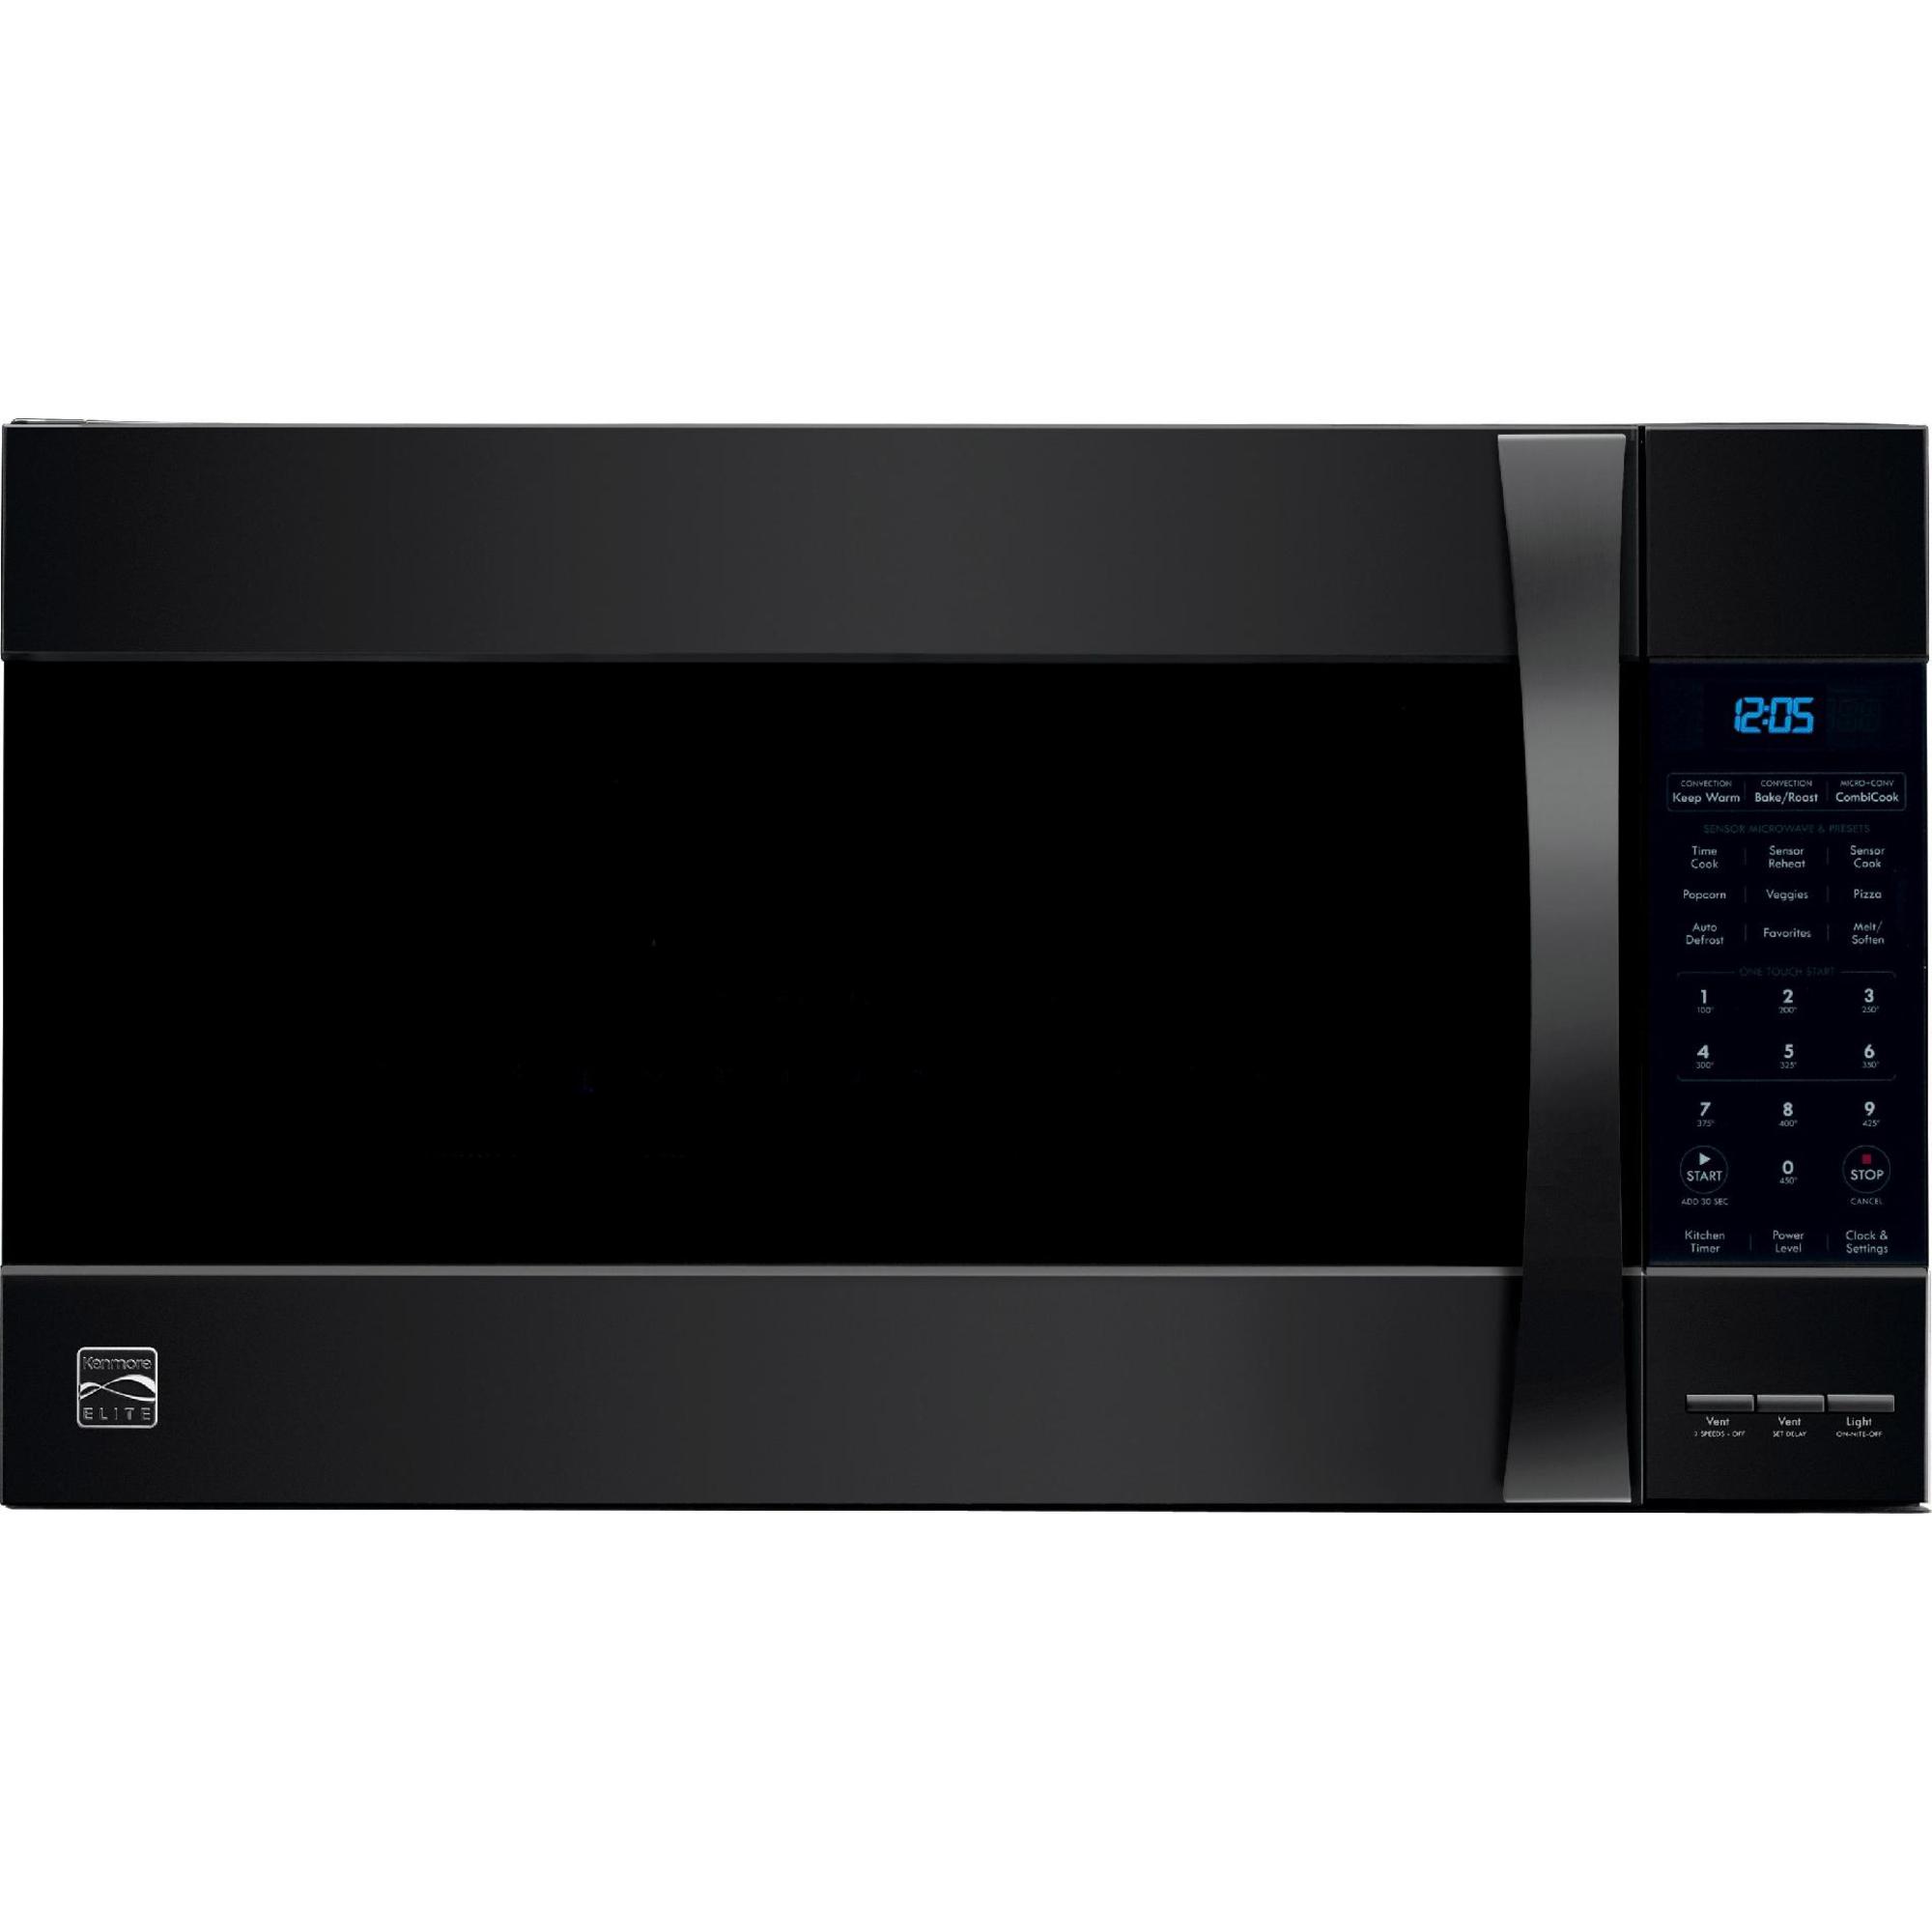 Kenmore Elite 1.5 cu ft. Convection Microwave: CombiCook at Sears